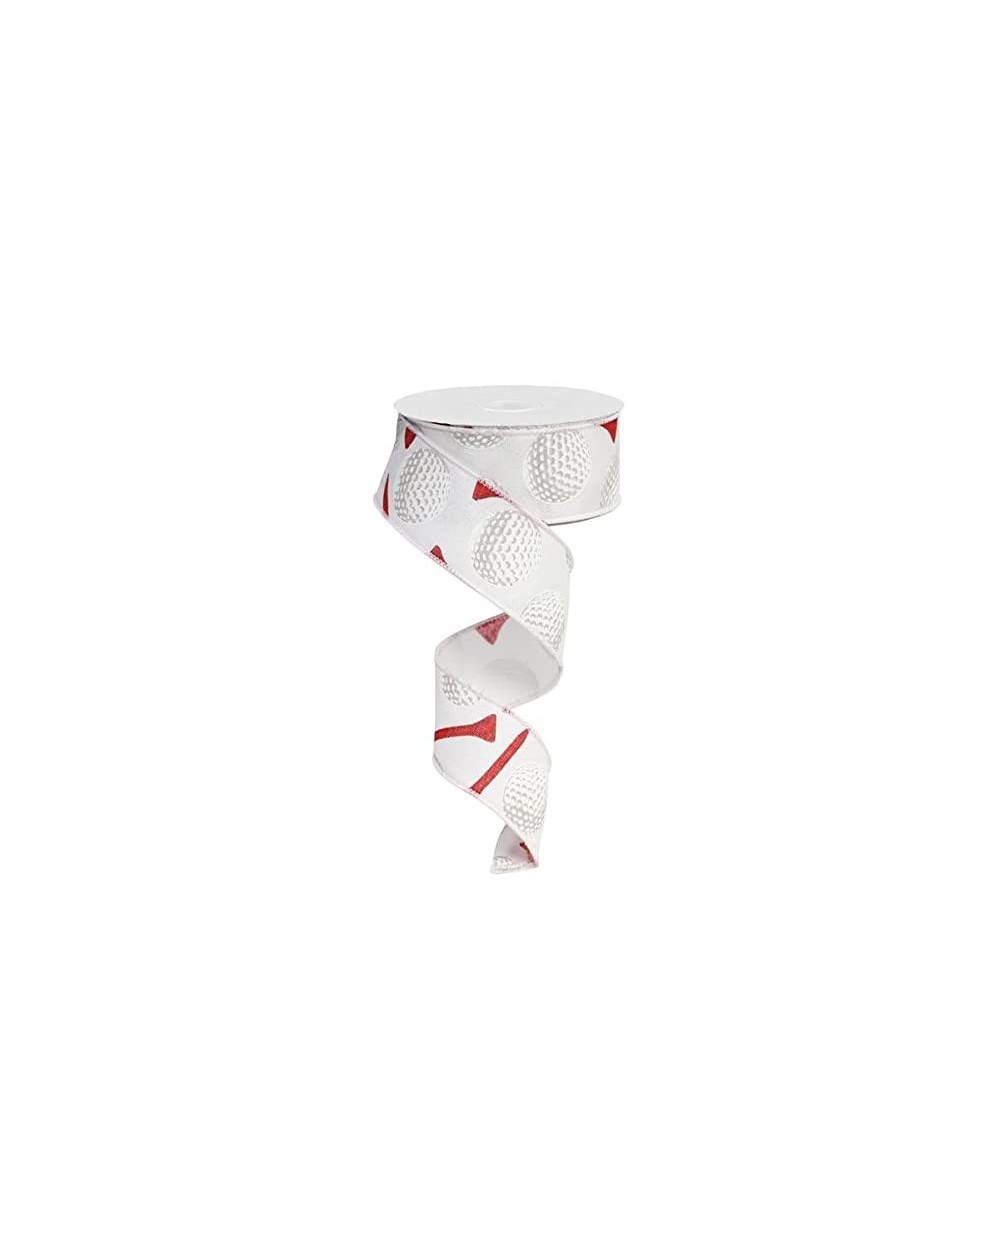 Bows & Ribbons Craig Bachman Imports- White/Red 1.5" x10yd Wired Golf Ball Ribbon - CI18EQCXSTS $36.99